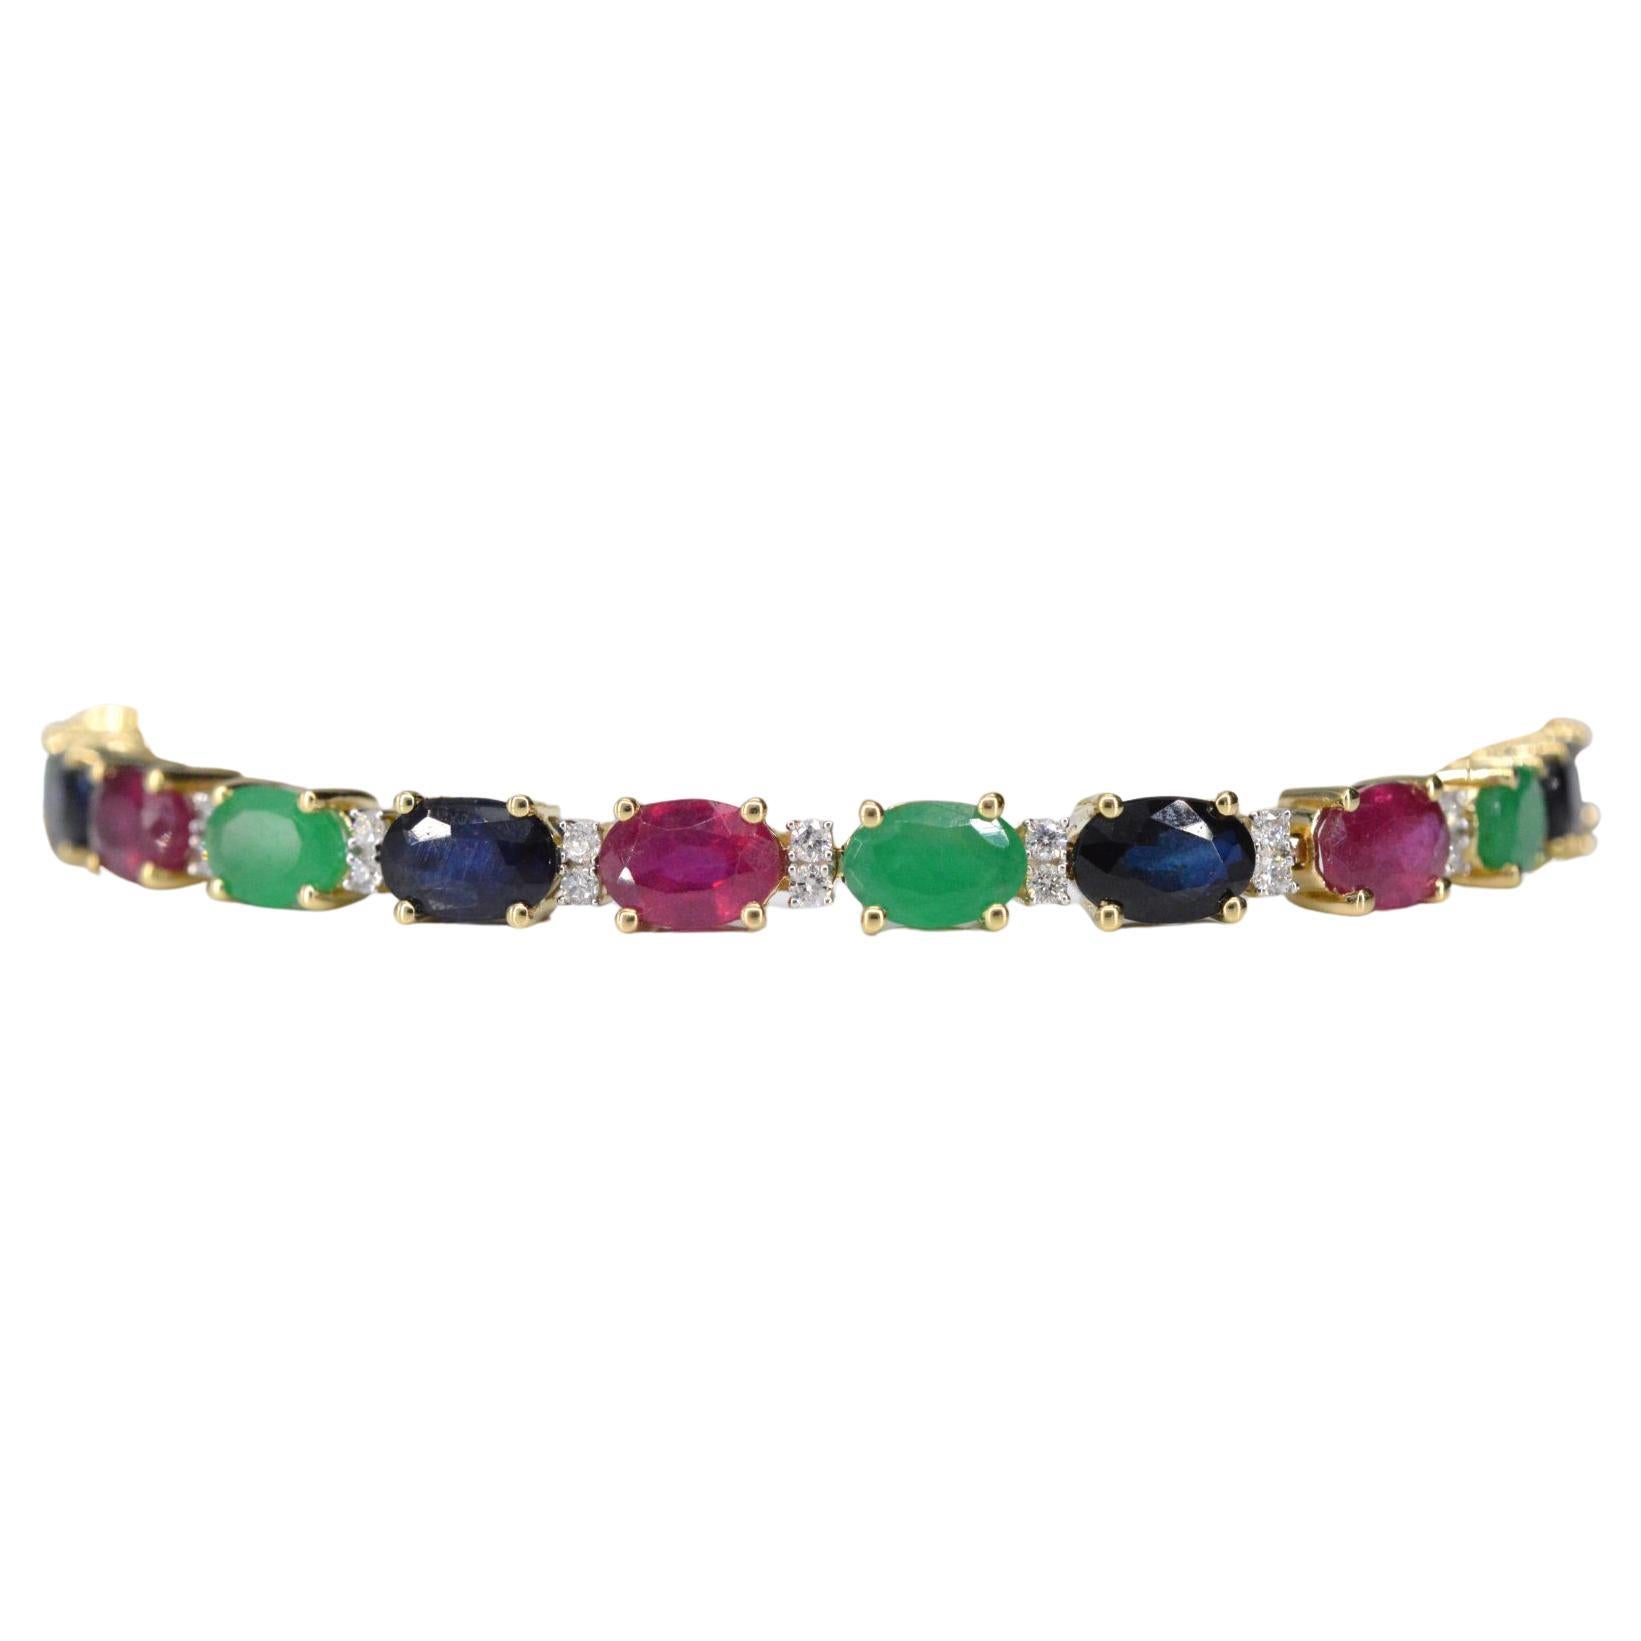 Introducing an exquisite bracelet featuring a harmonious combination of diamonds and vibrant gemstones. The diamonds, with a total weight of 0.50 carat, are brilliant cut, providing a dazzling sparkle. They exhibit a color range of F-G and a clarity